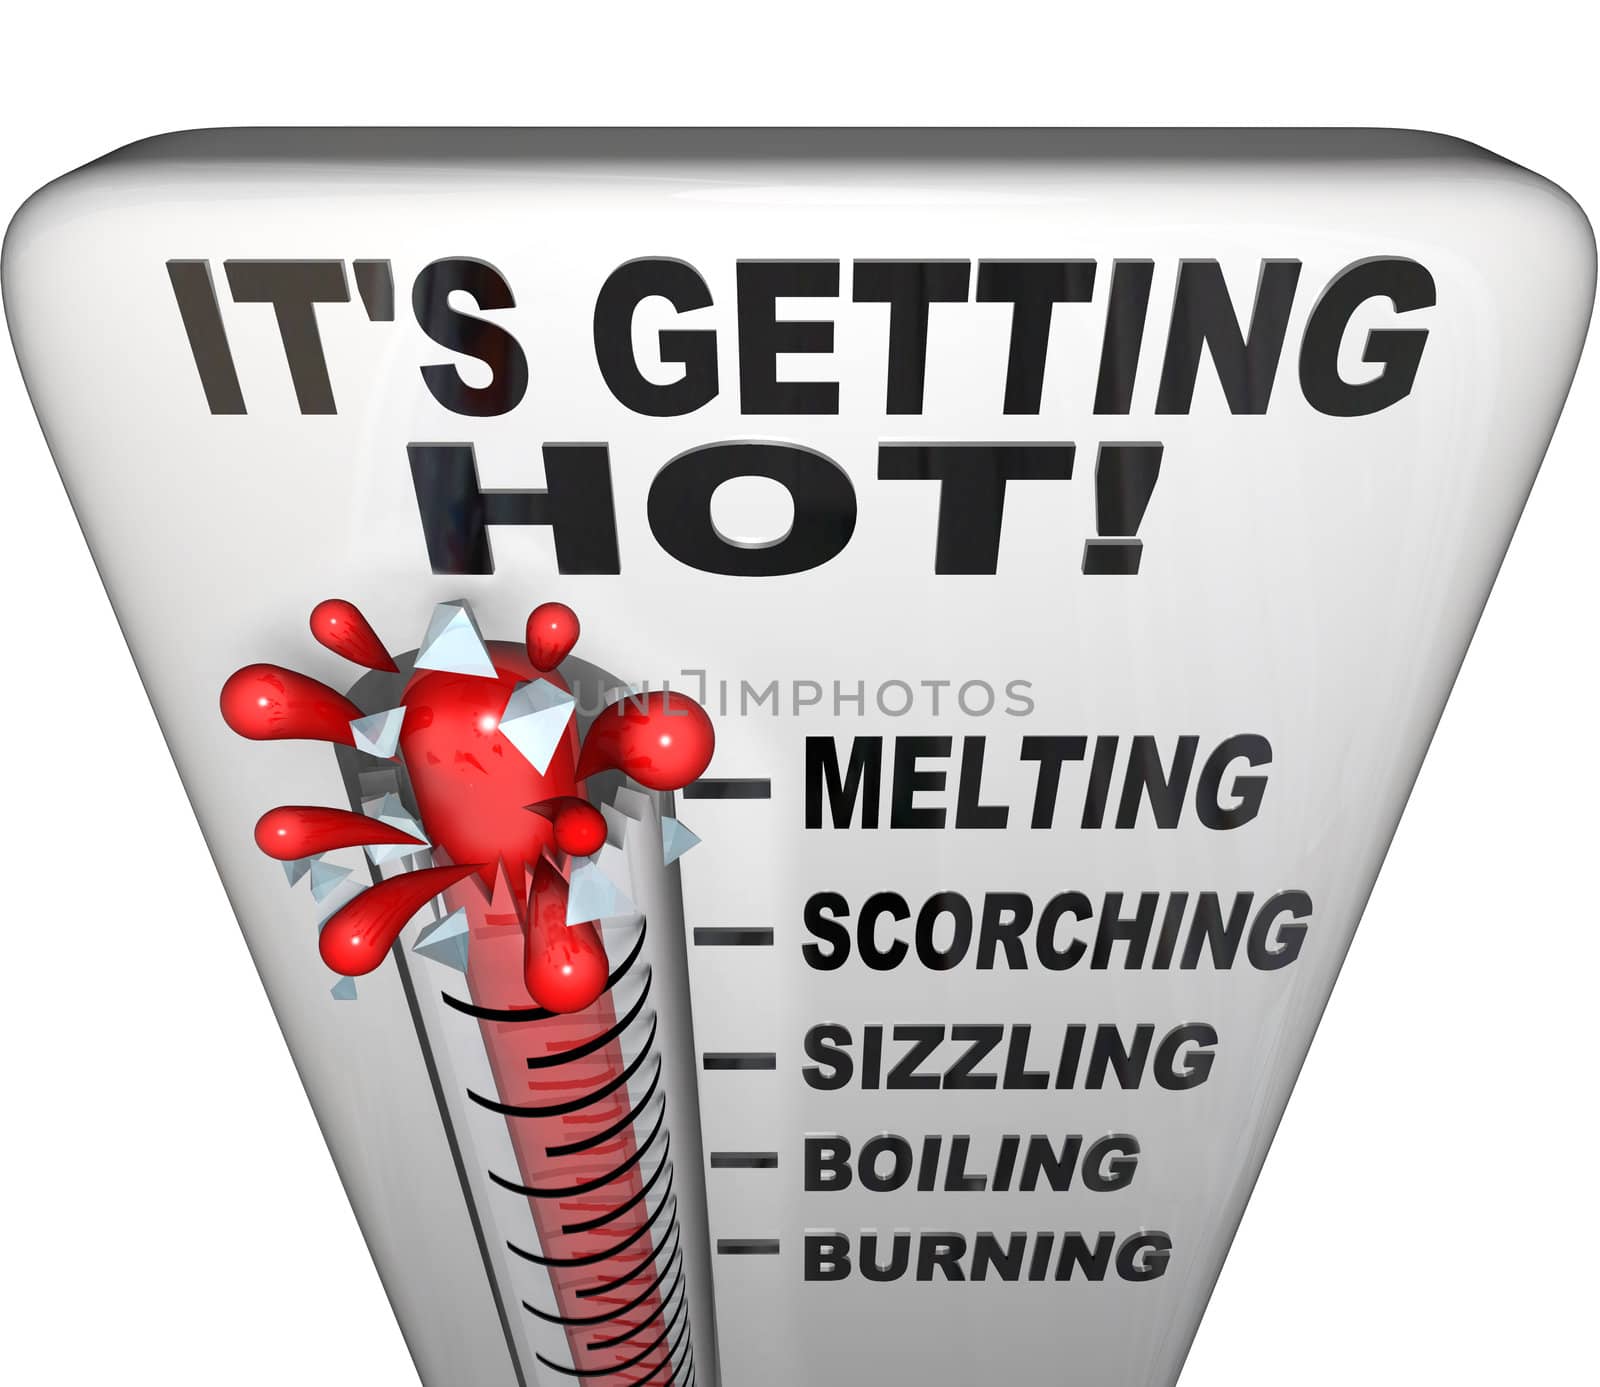 A thermometer with words It's Getting Hot at the top, with the mercury exploding through the glass and the descriptive terms melting, scorching, sizzling, boiling, burning